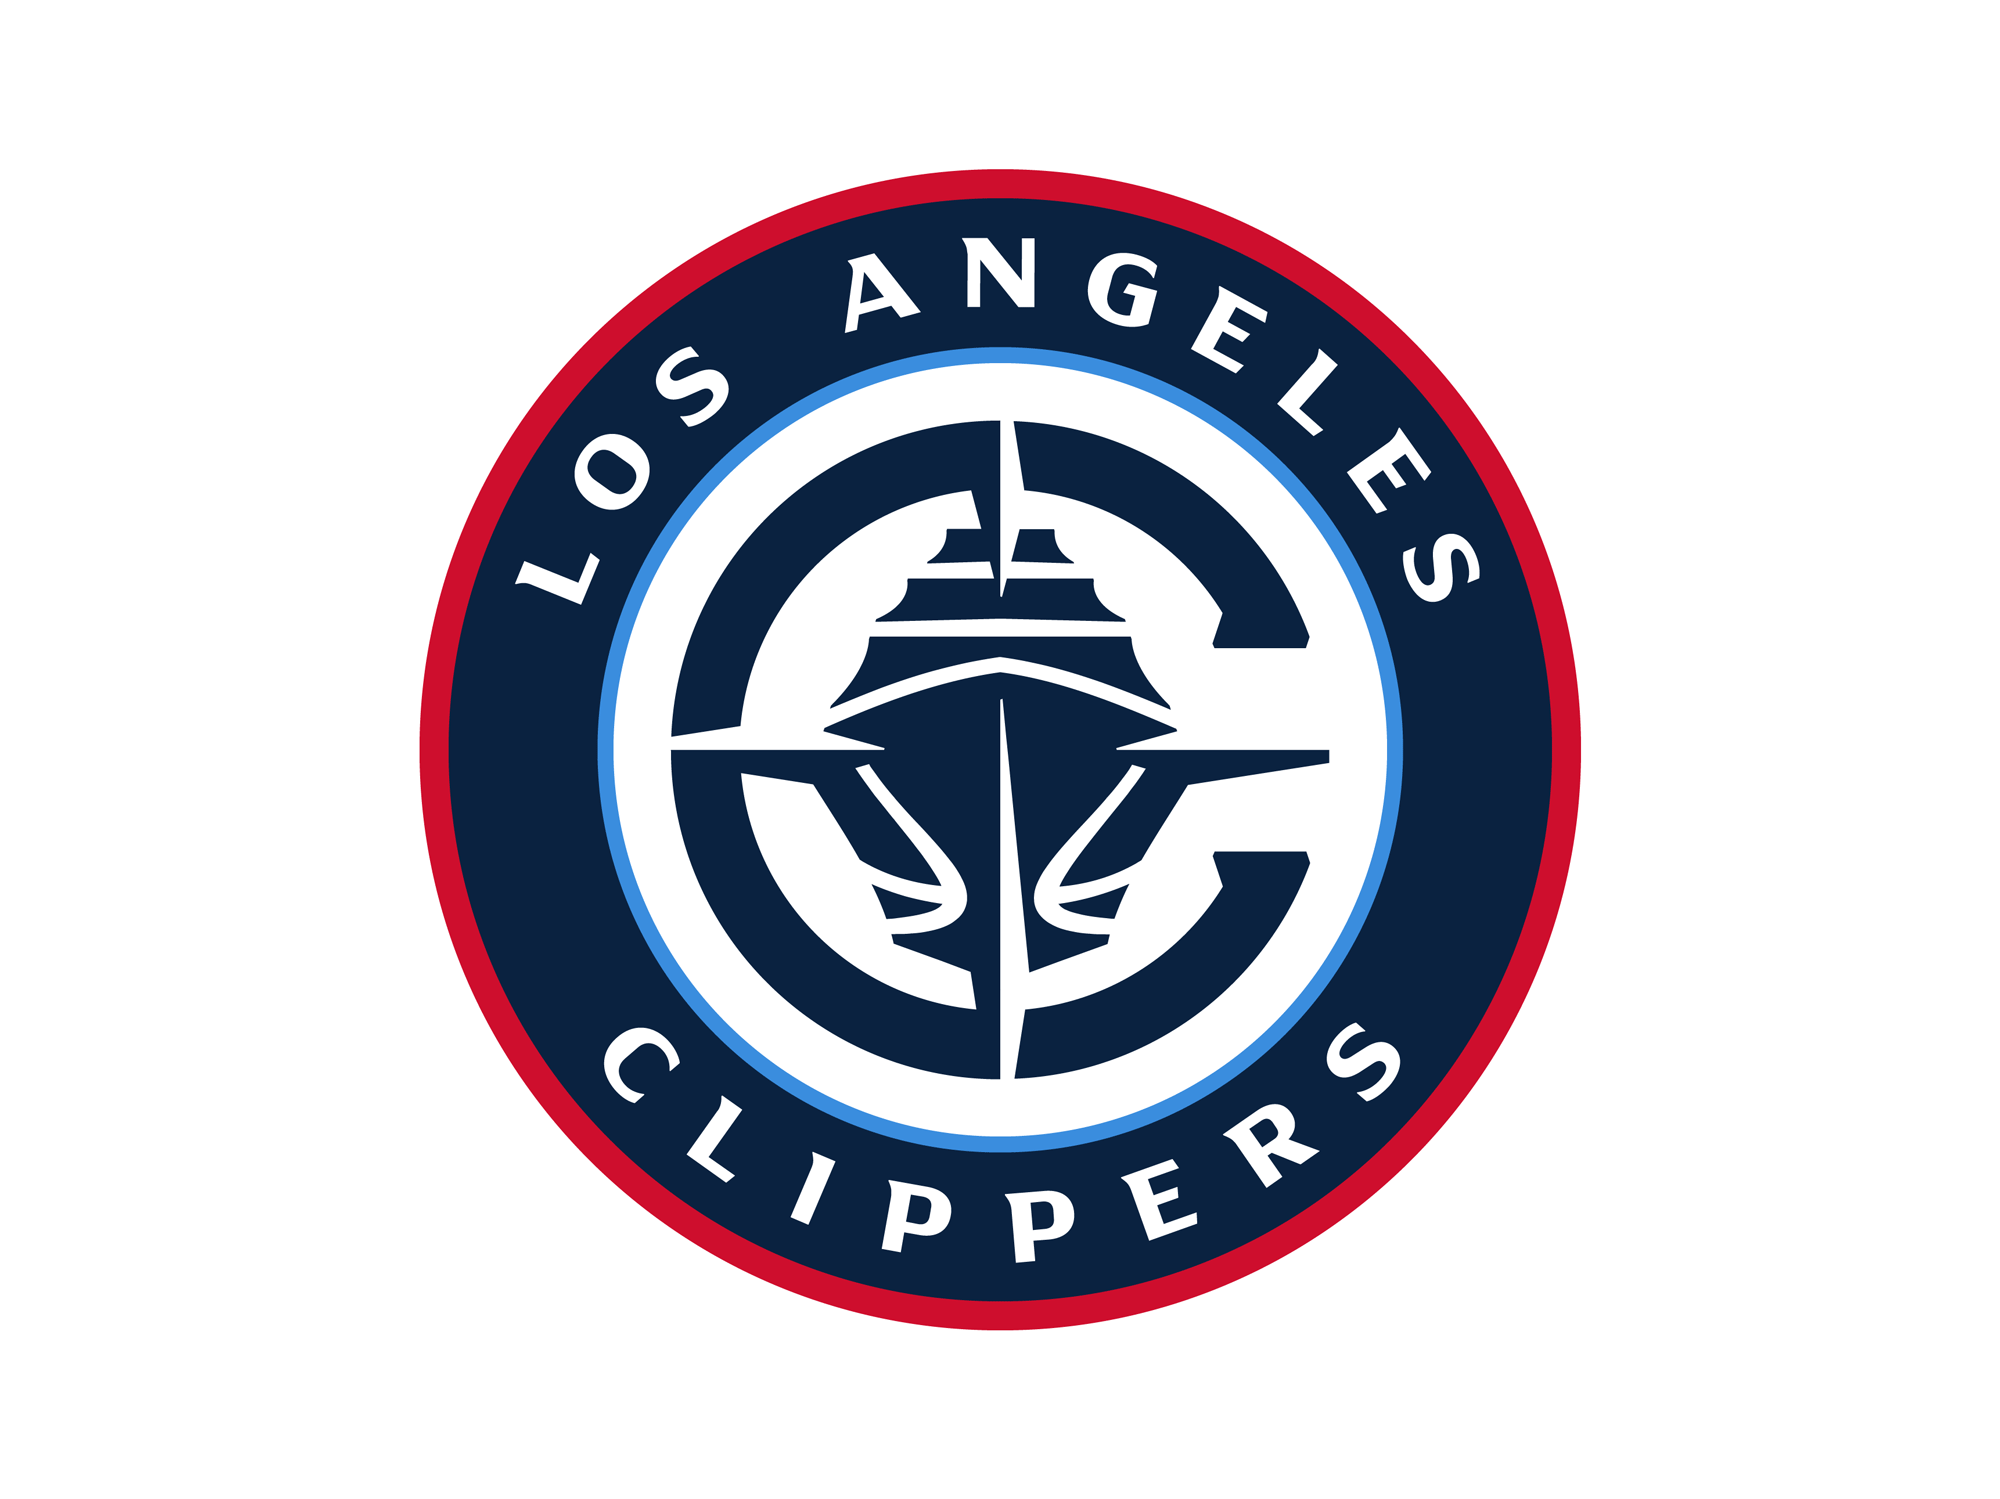 los angeles clippers jersey 2016